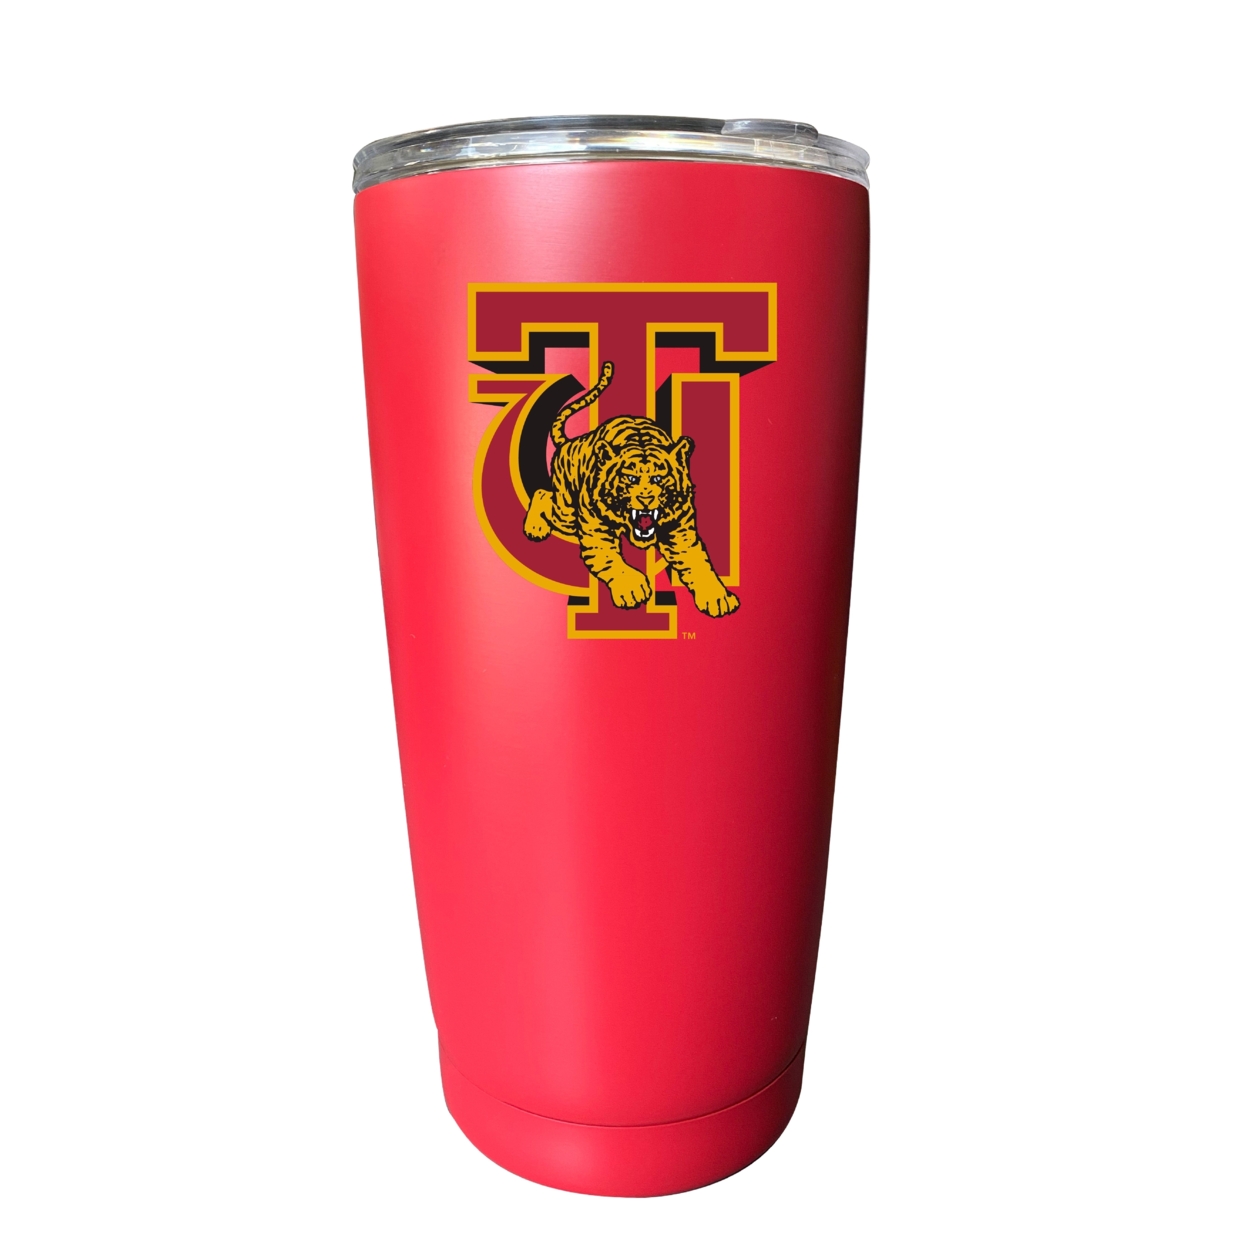 Tuskegee University 16 Oz Insulated Stainless Steel Tumbler - Choose Your Color. - Red